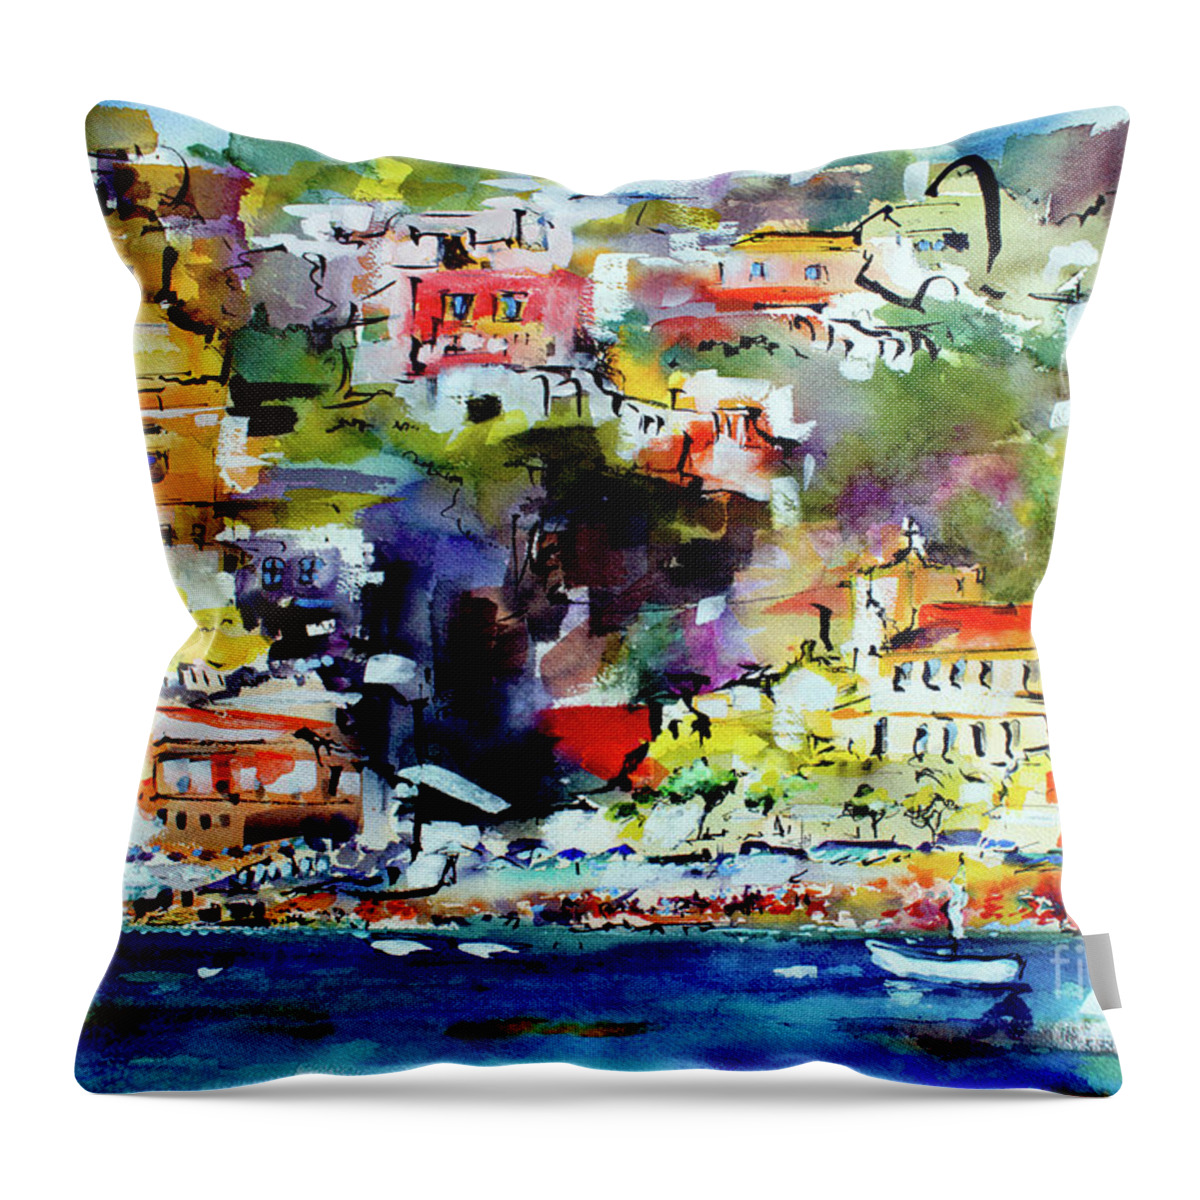 Positano Throw Pillow featuring the painting Amalfi Coast Positano Summer Vibrations by Ginette Callaway